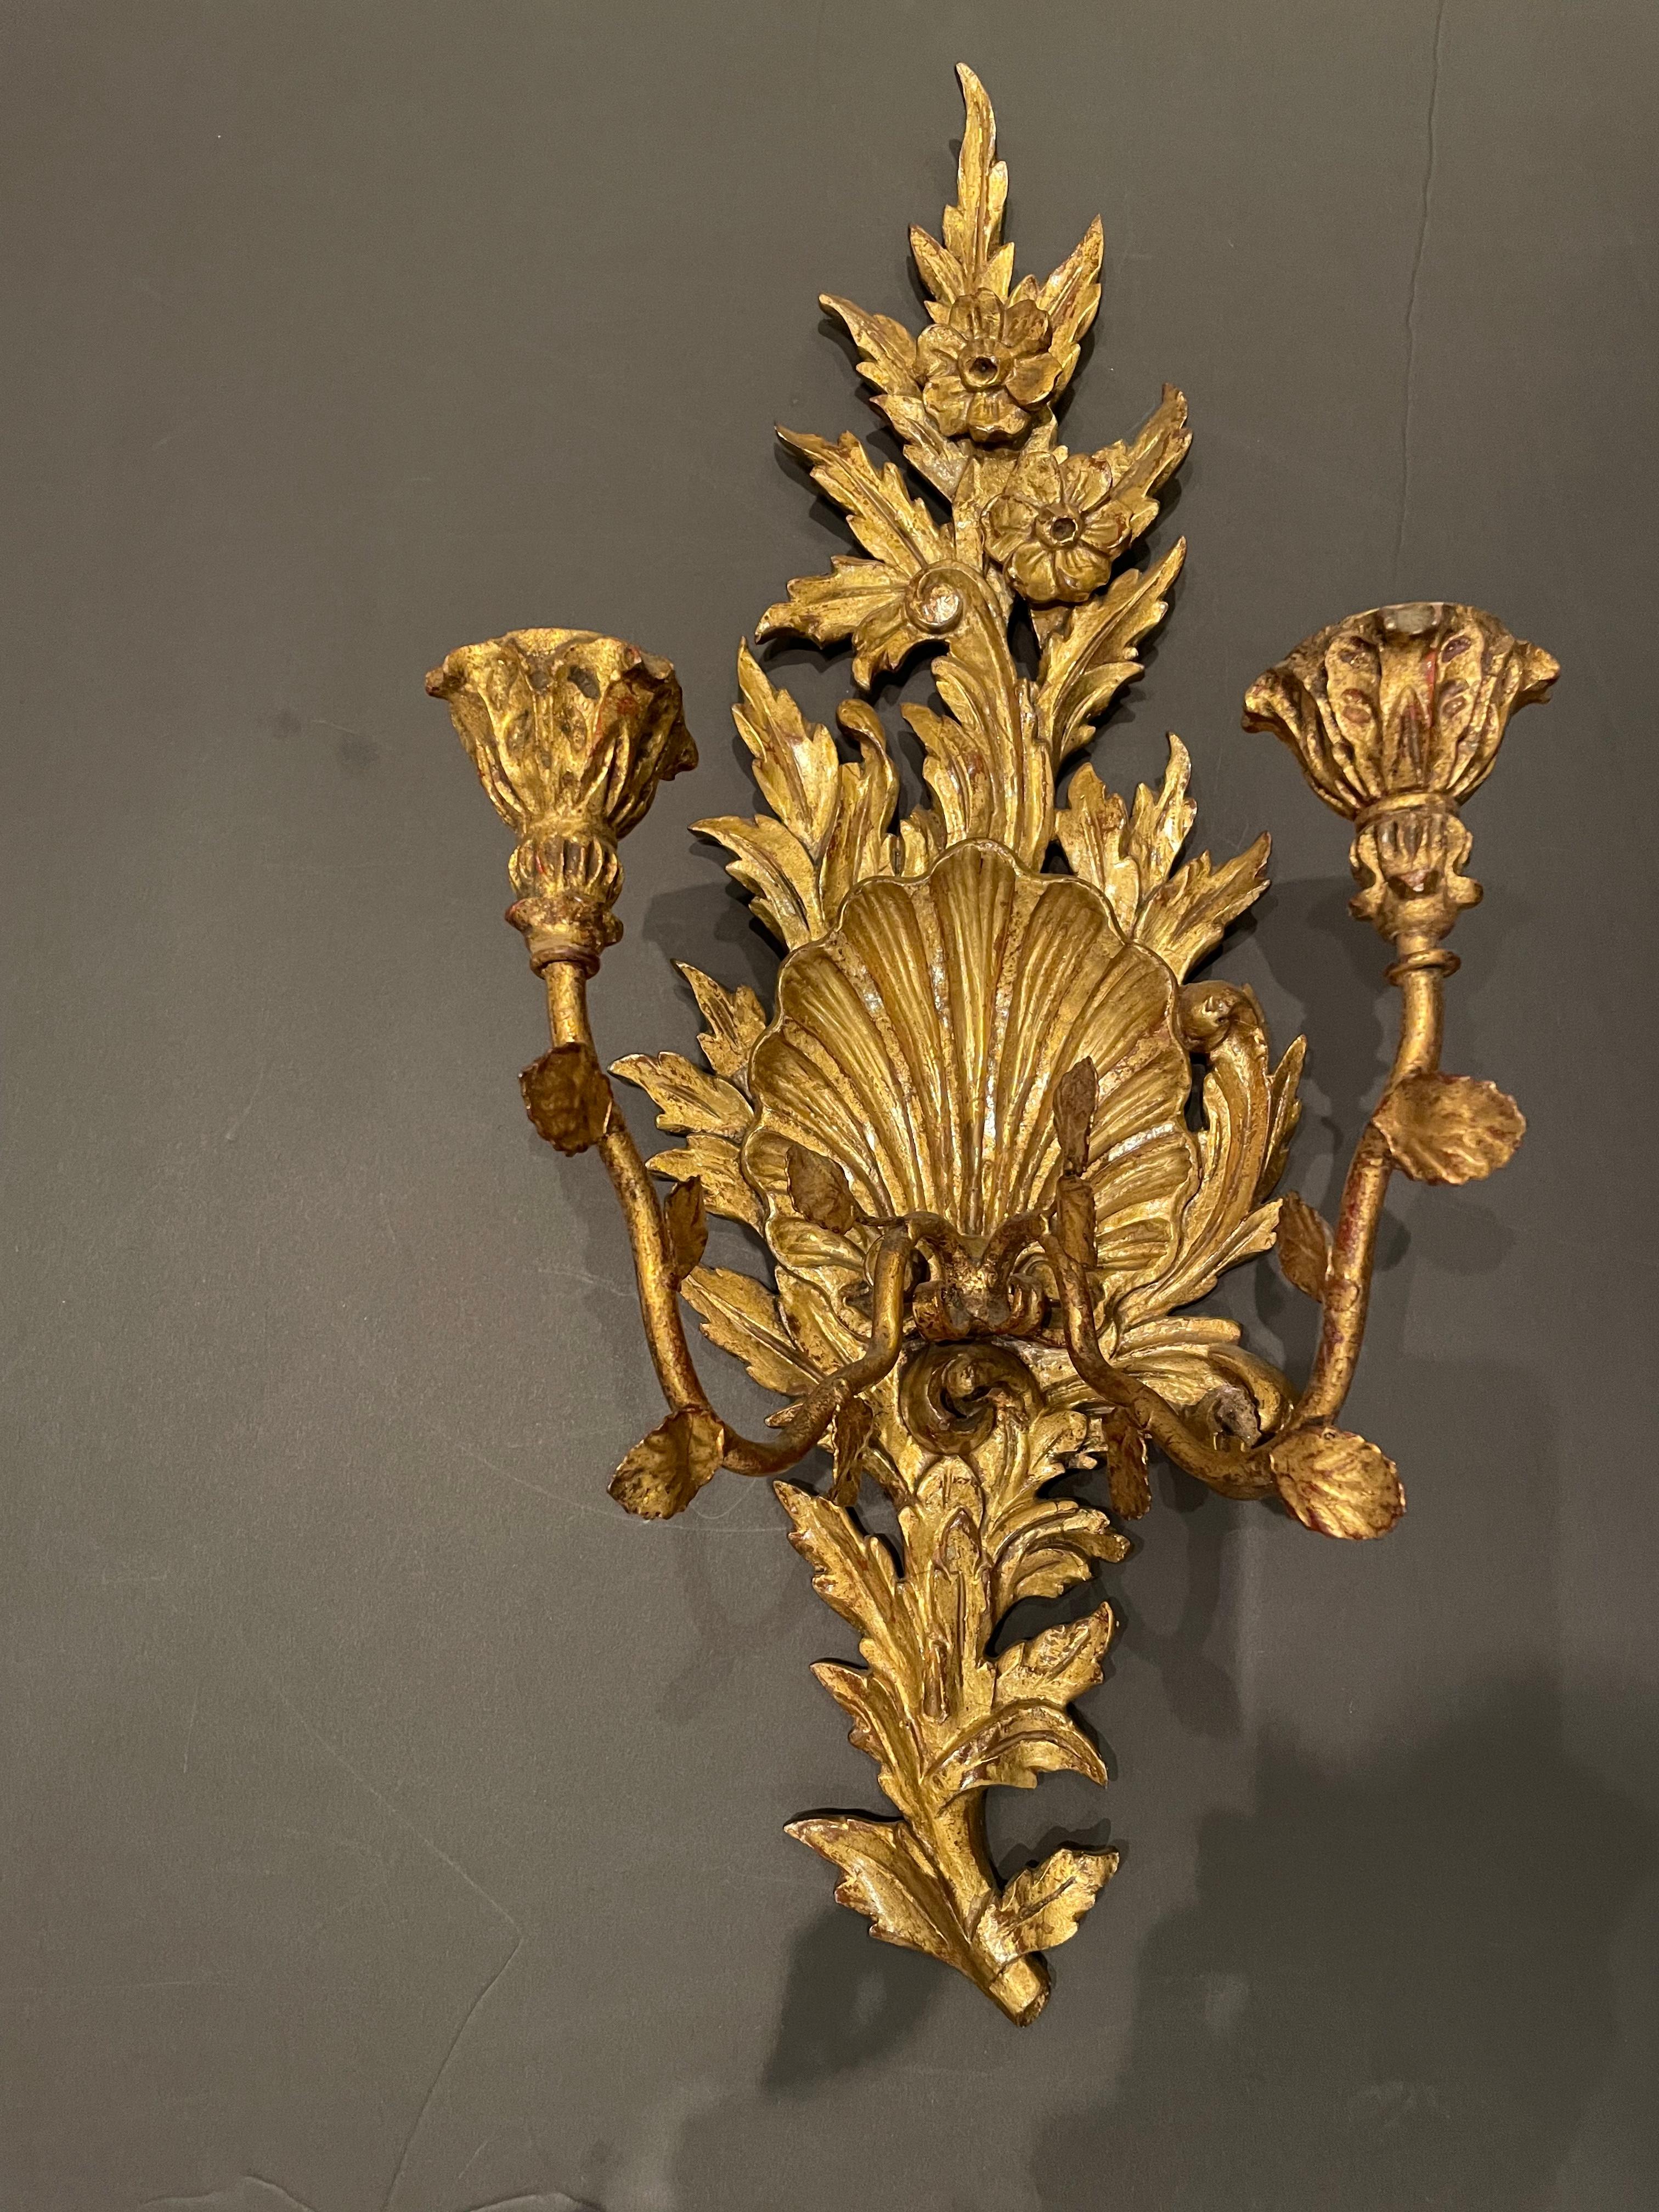 Elegant pair of Italian Rococo style giltwood and metal two arm wall sconces. The center of each sconce has a scallop shell design. The body is constructed of giltwood and the arms are metal in a gilt finish.